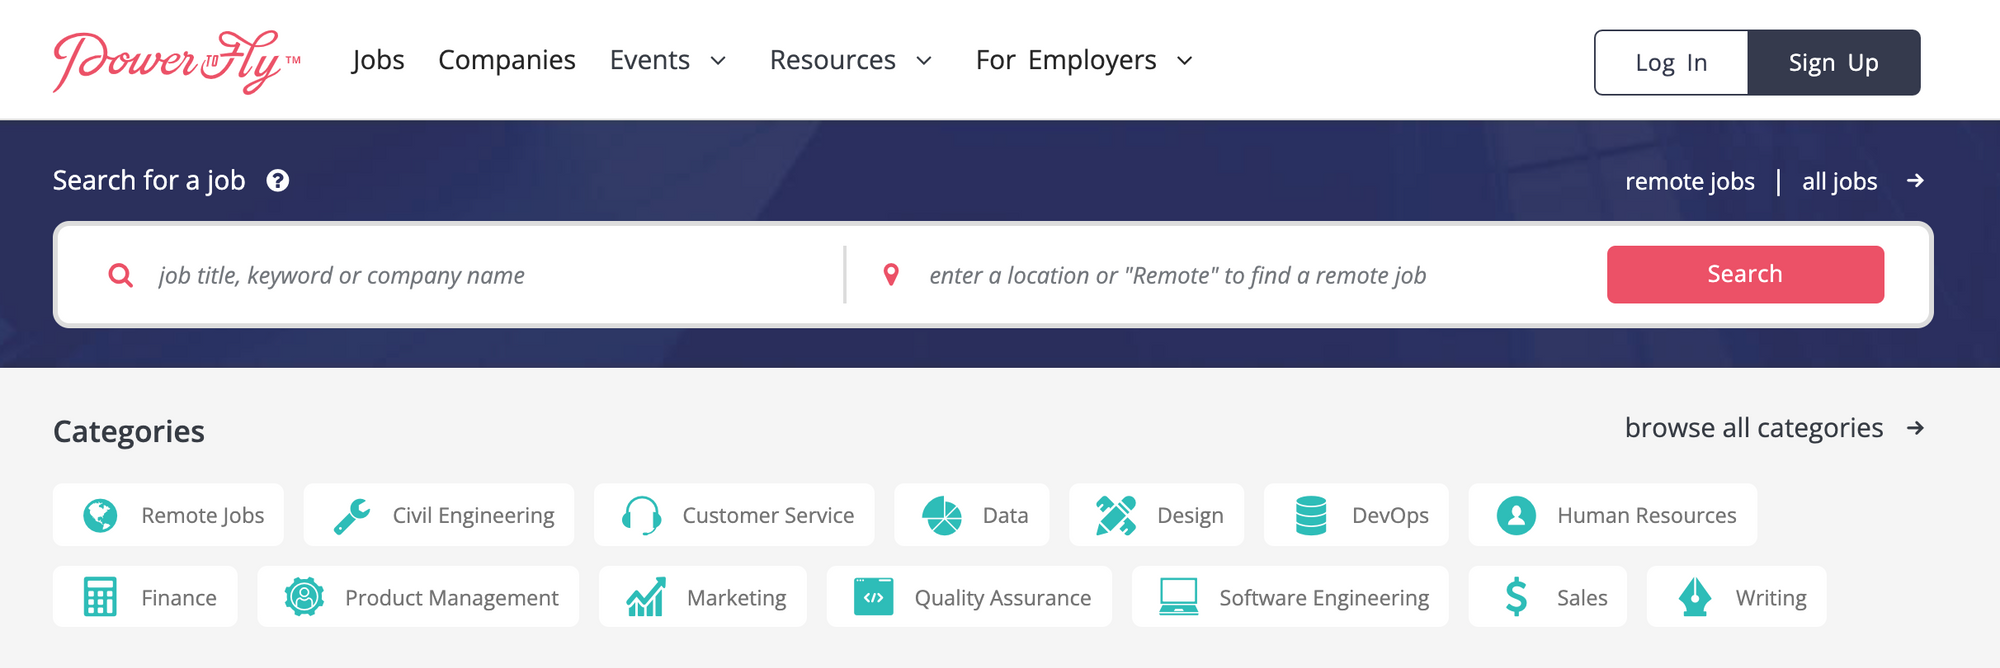 PowerToFly, a great website for finding remote jobs